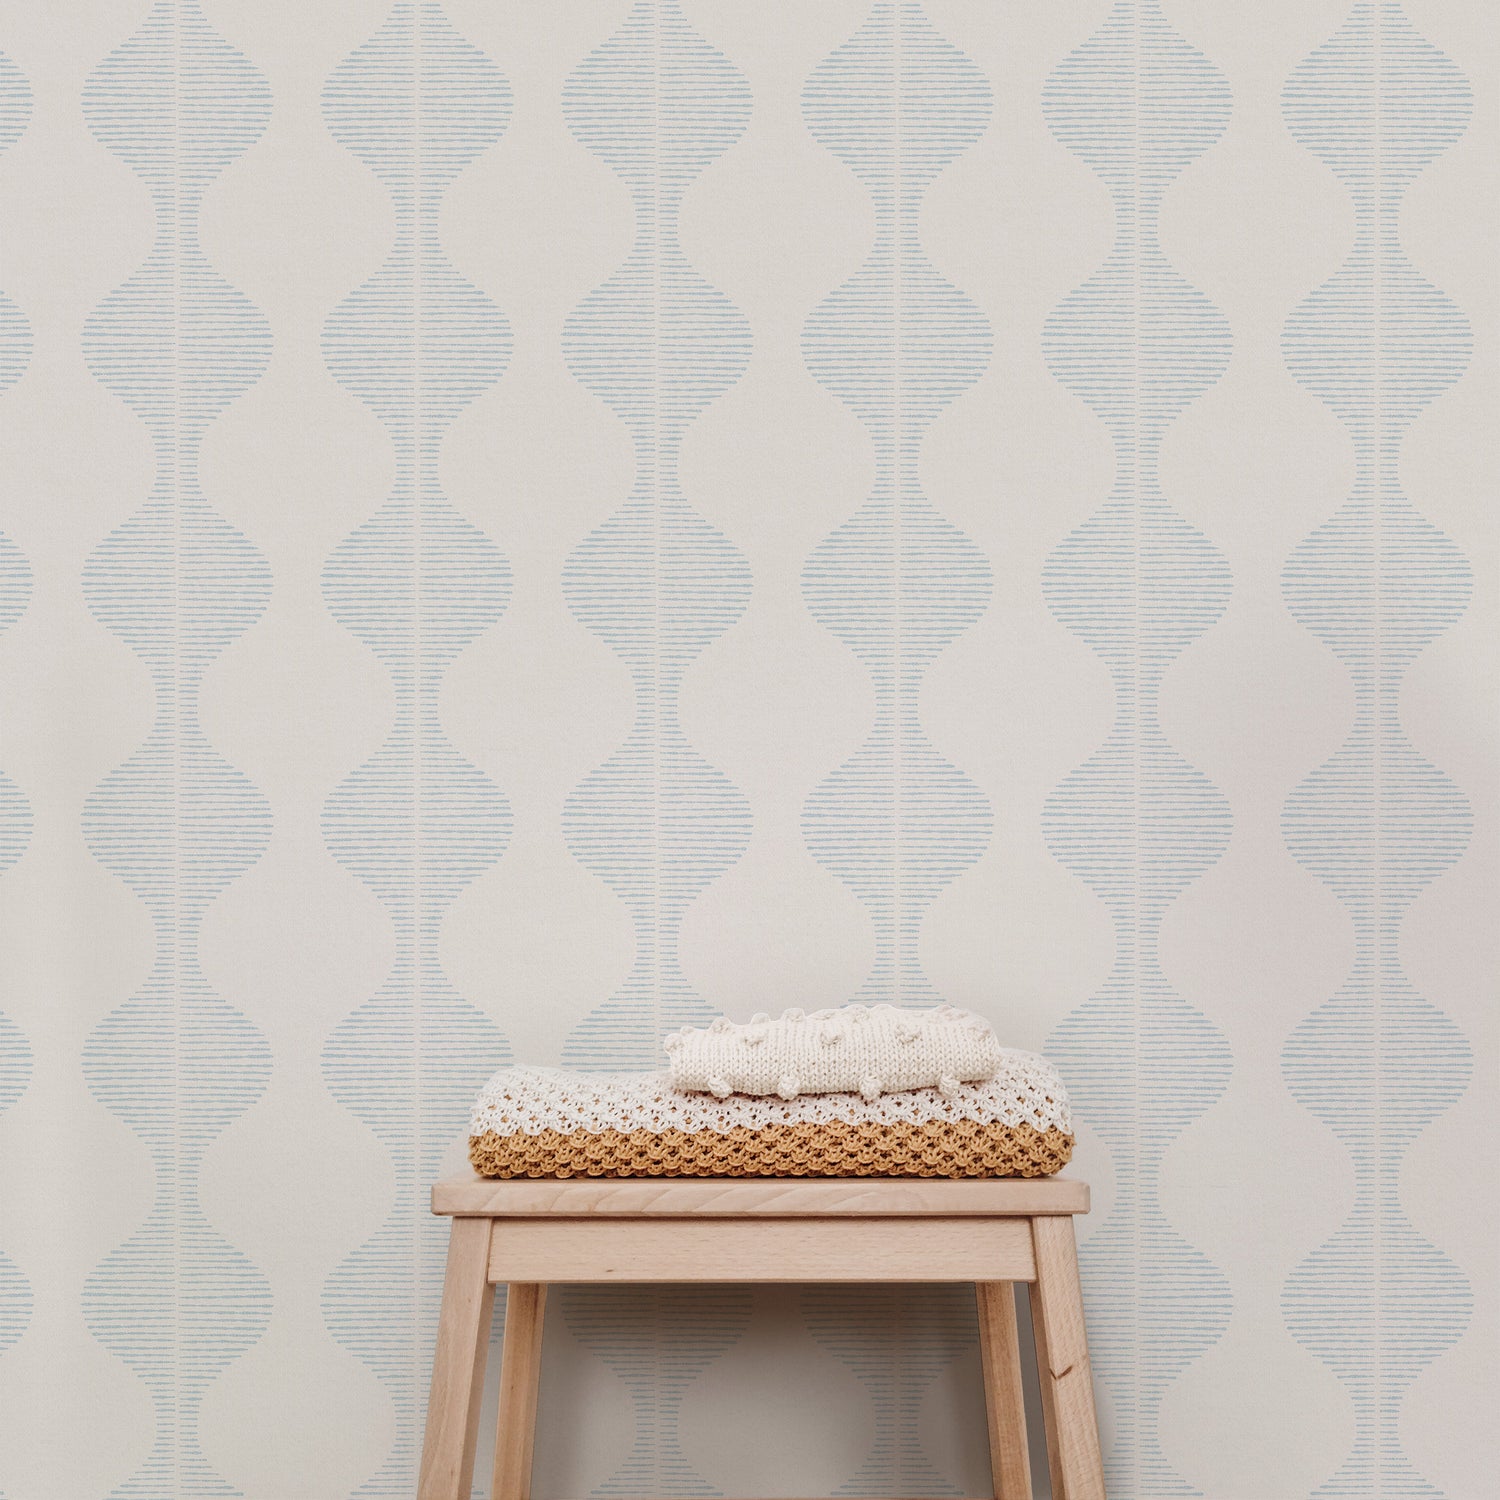 Bring a wave of modern beauty to any room with this stunning Wavy Line Art Wallpaper! The subtle pale blue on cream design is completely gorgeous and sure to make a statement in any space.